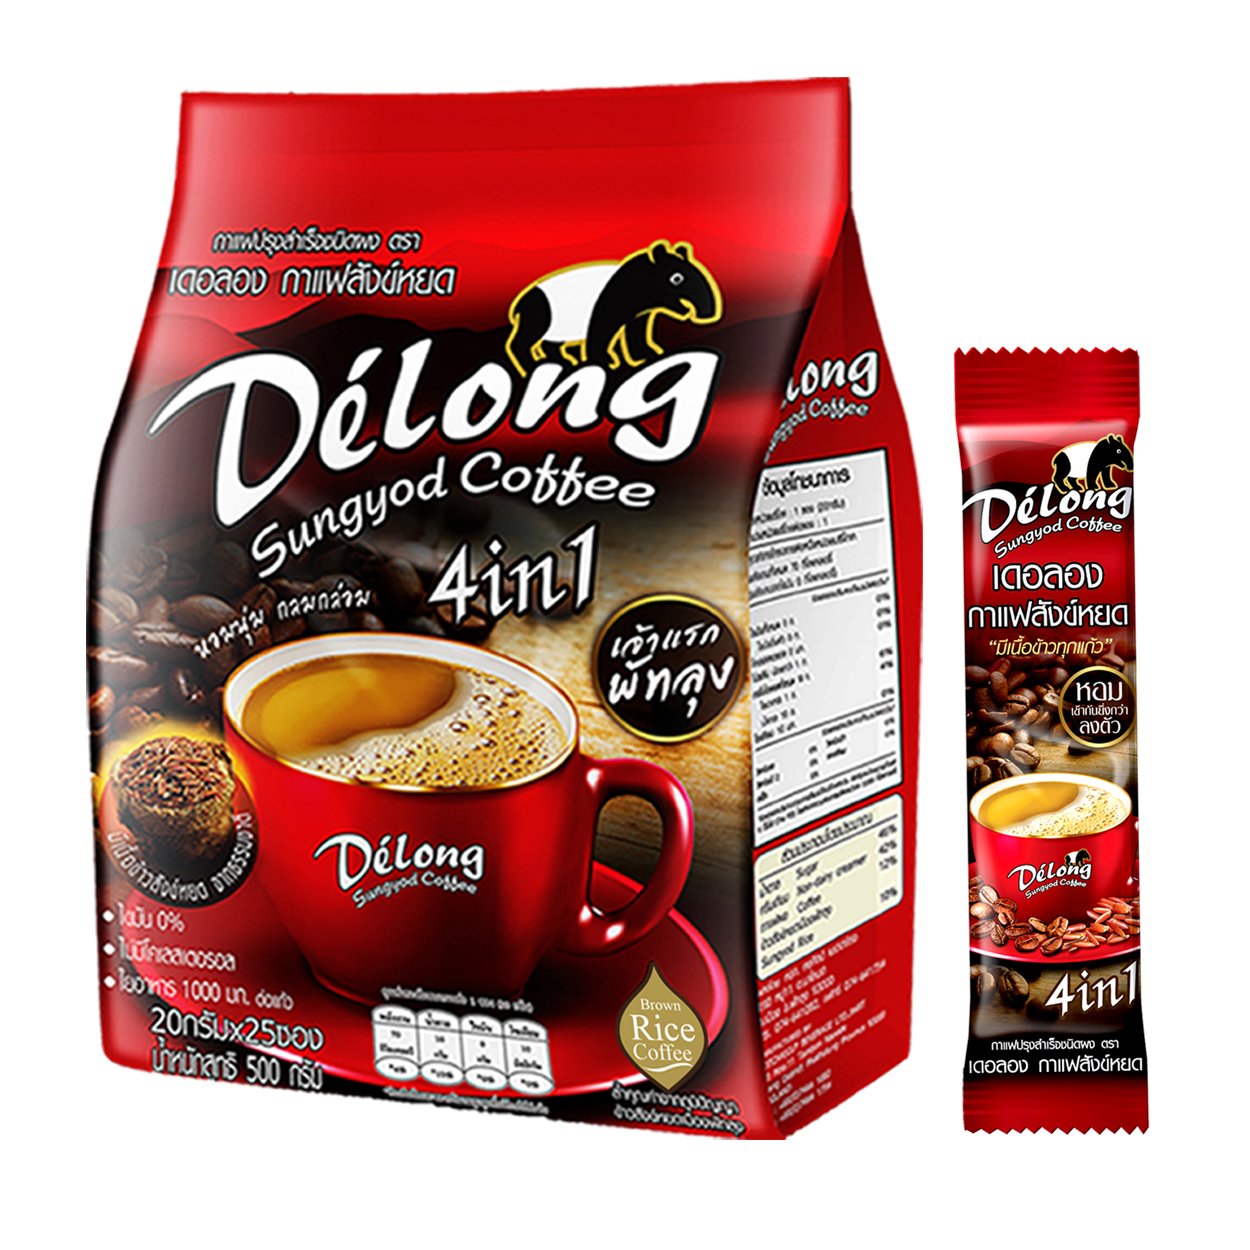 Delong Sungyod Coffee 4in1